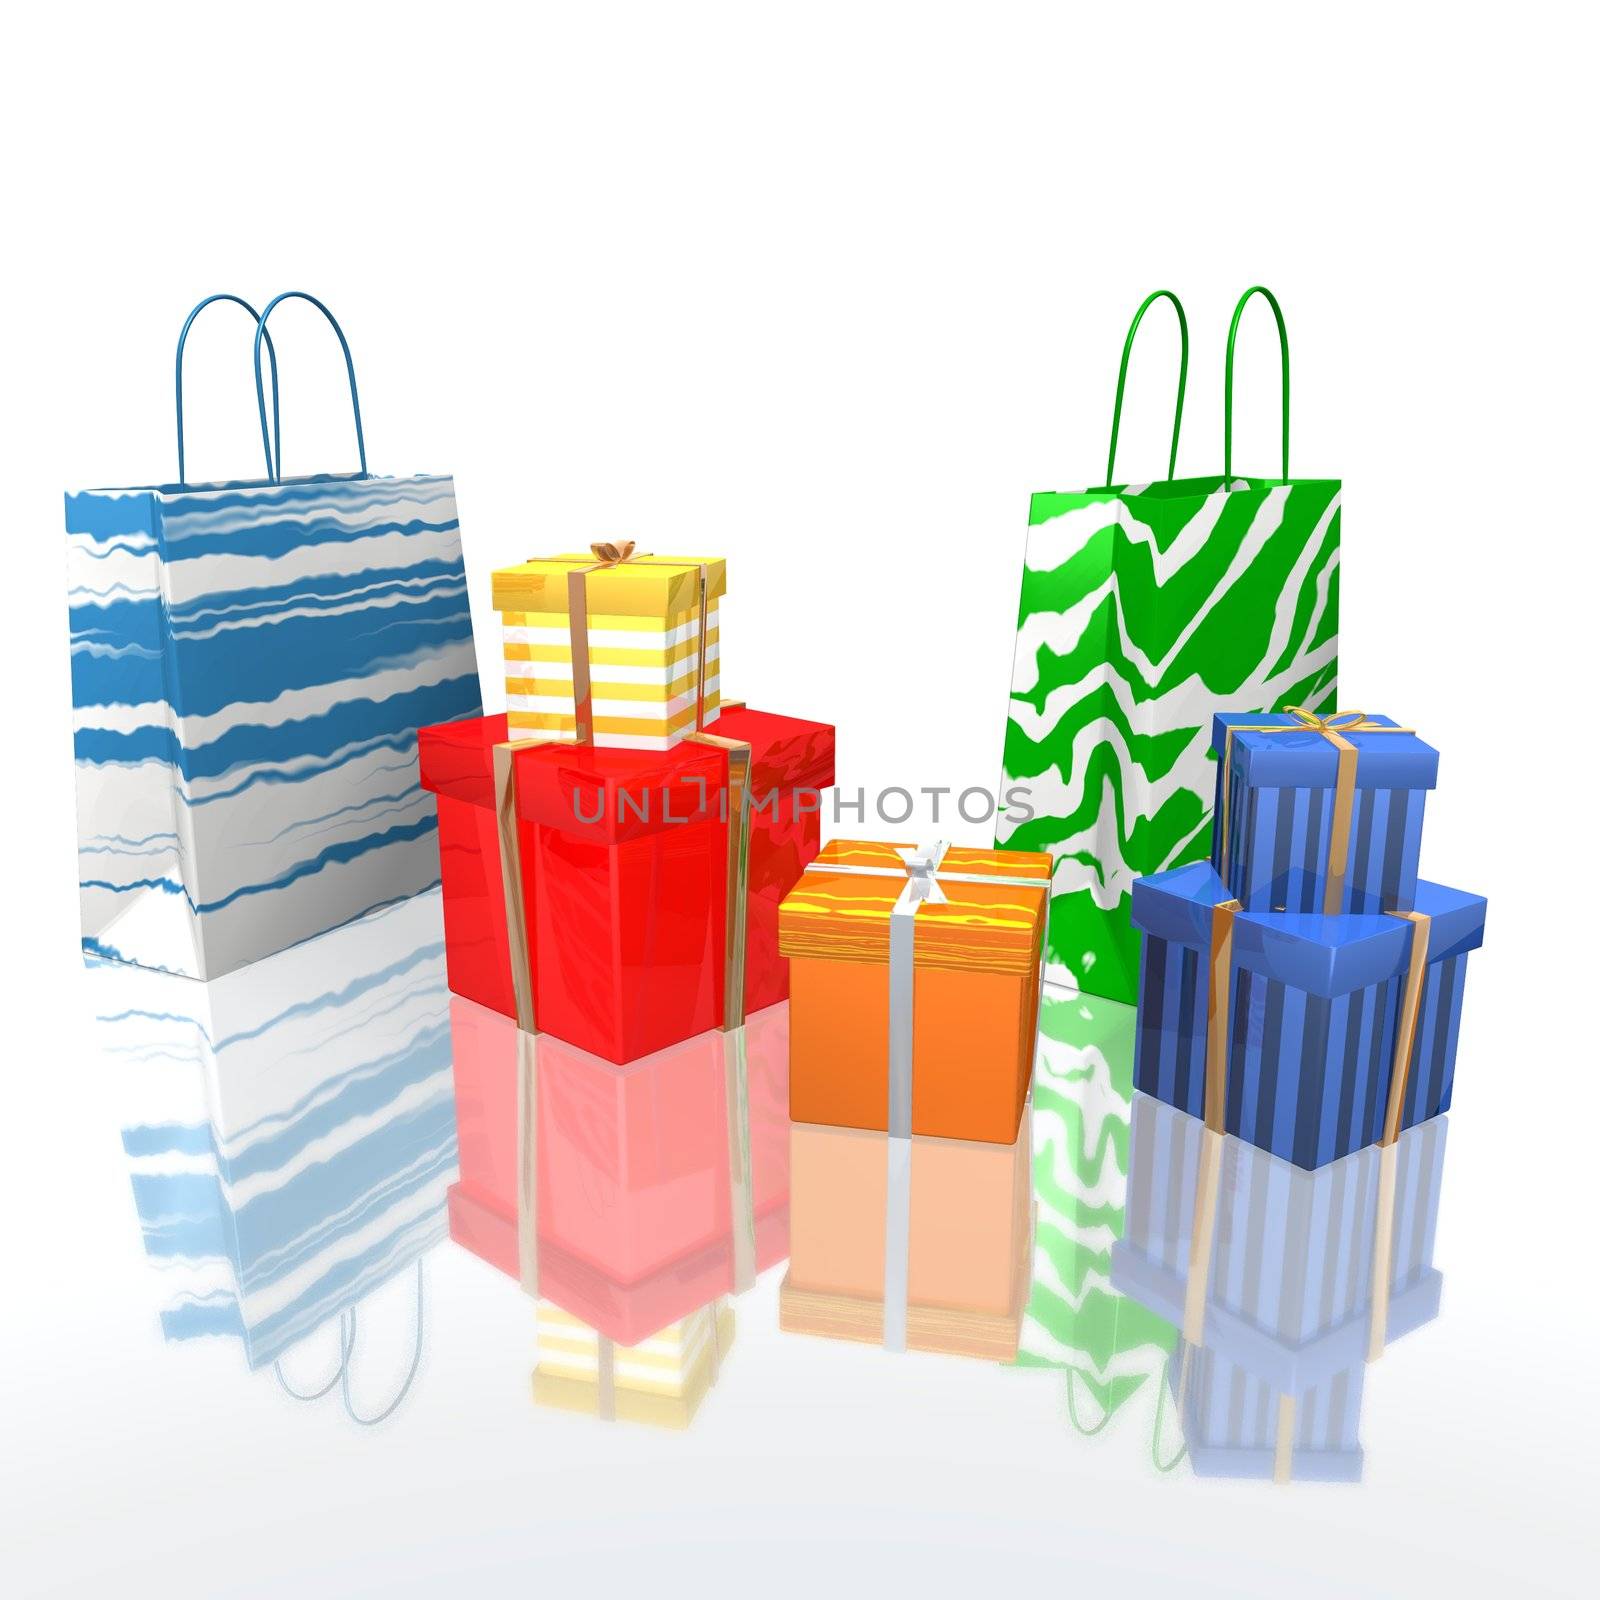 a 3d rendering of some shopping bags and gifts